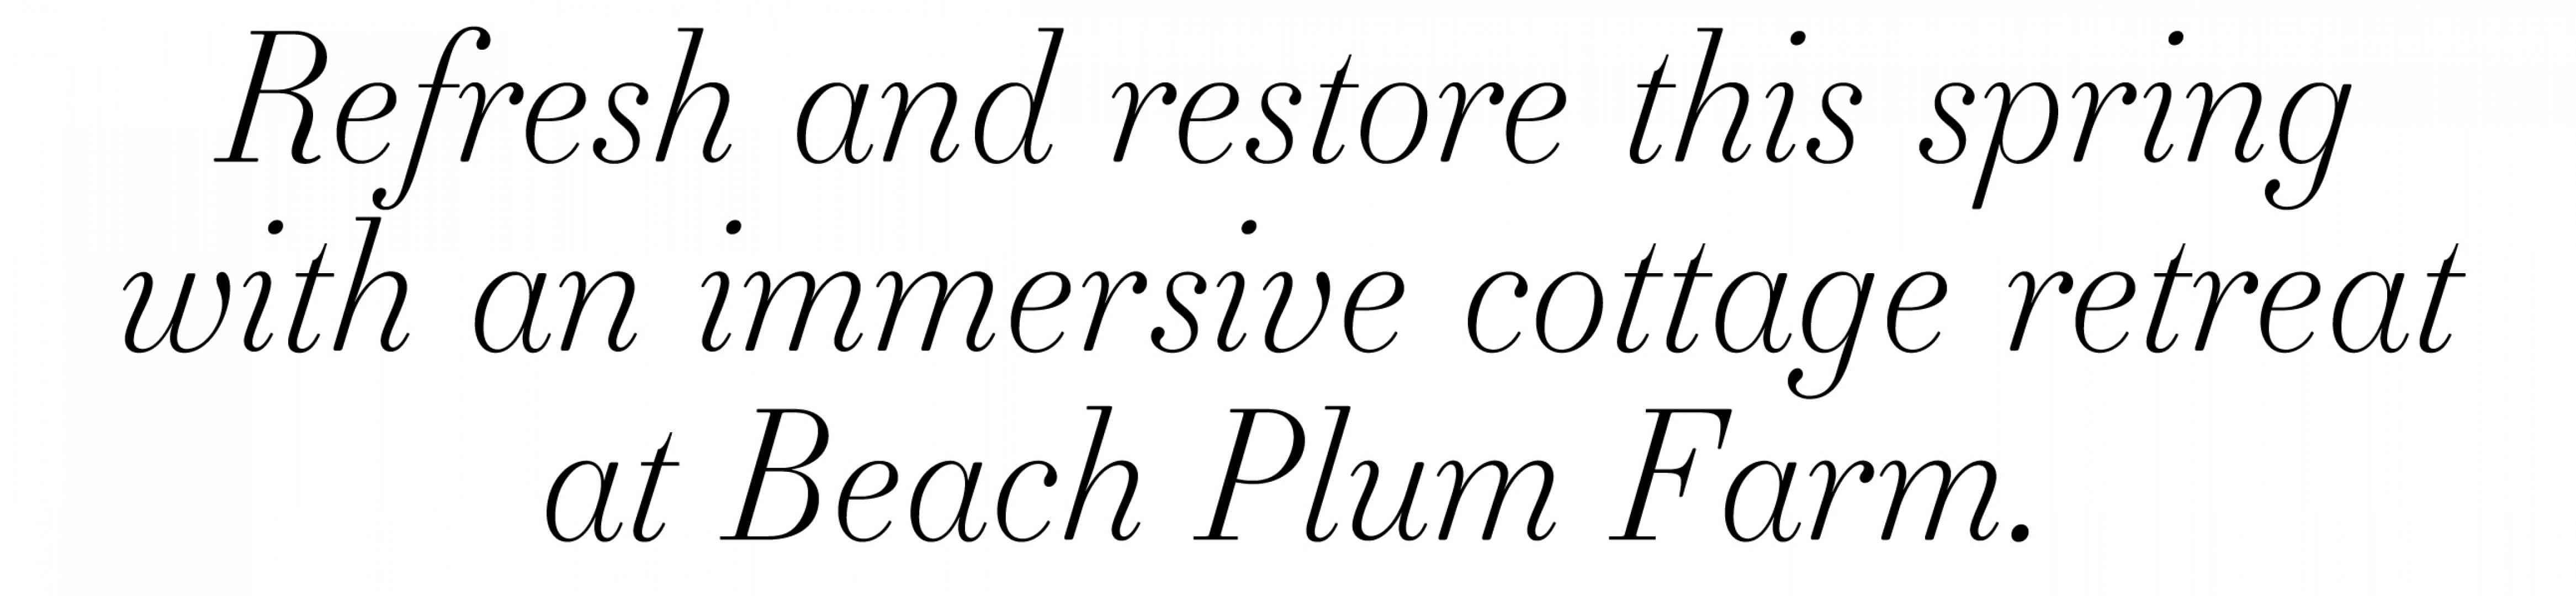 text that reads 'Refresh and restore this spring with an immersive cottage retreat at Beach Plum Farm'